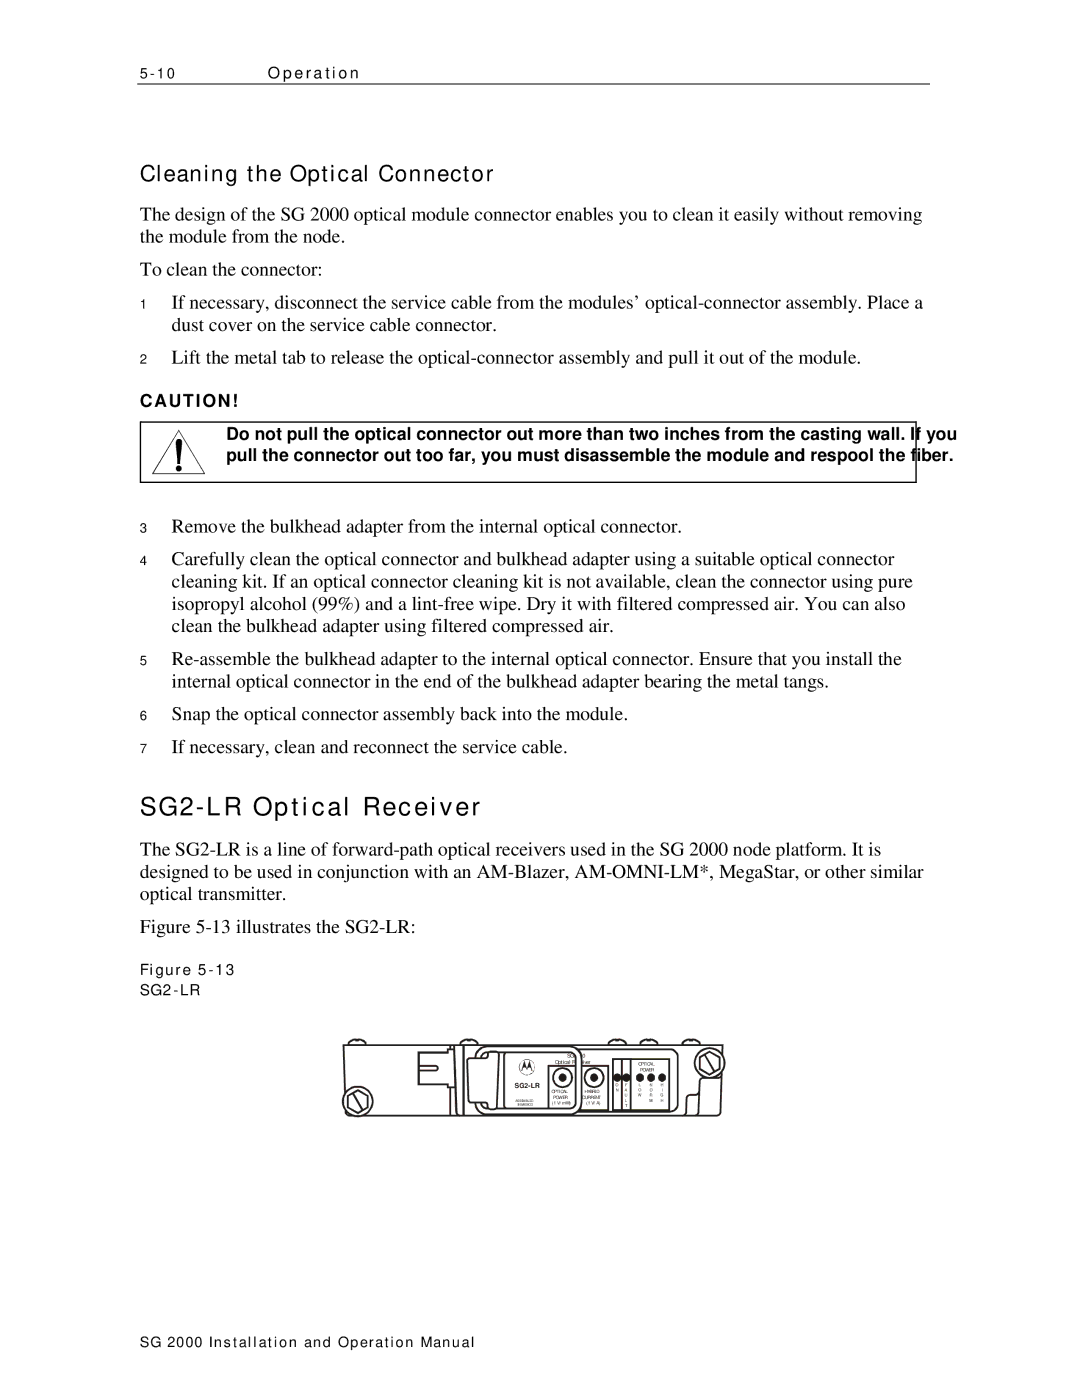 Motorola SG 2000 operation manual SG2 LR Optical Receiver, Cleaning the Optical Connector 